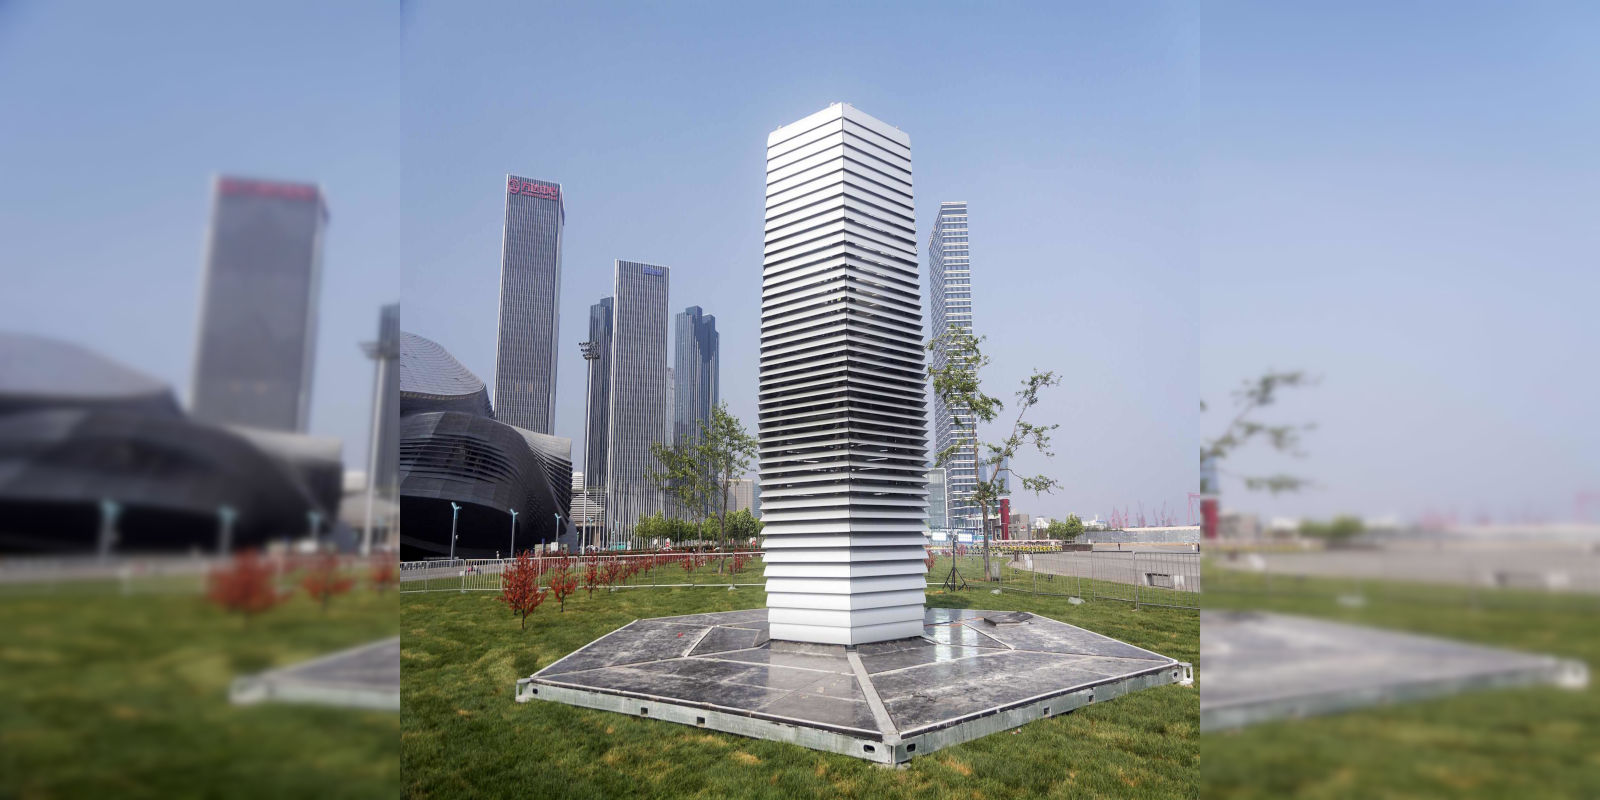 Air Purifier Concept – The future of our planet – Clean air in cities – The future of a greener planet